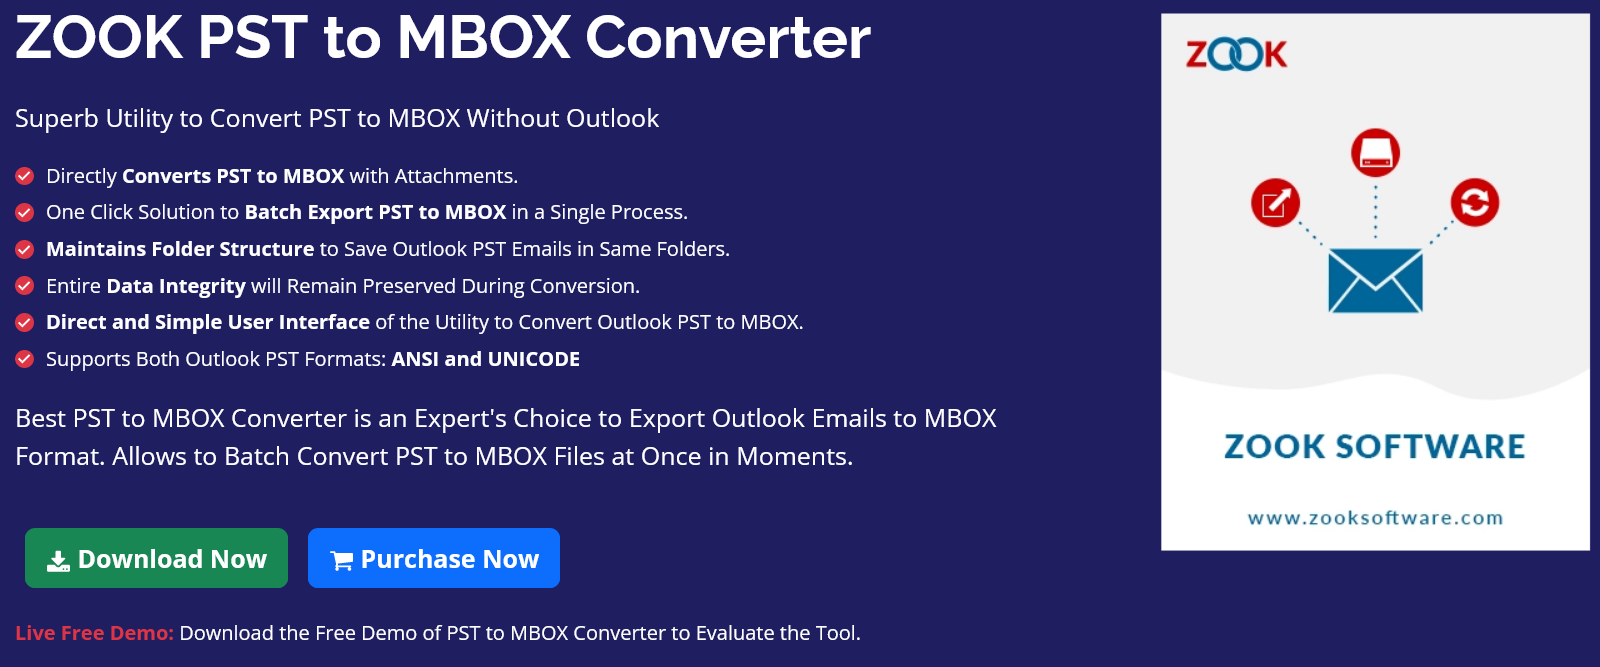 ZOOK PST to MBOX Converter